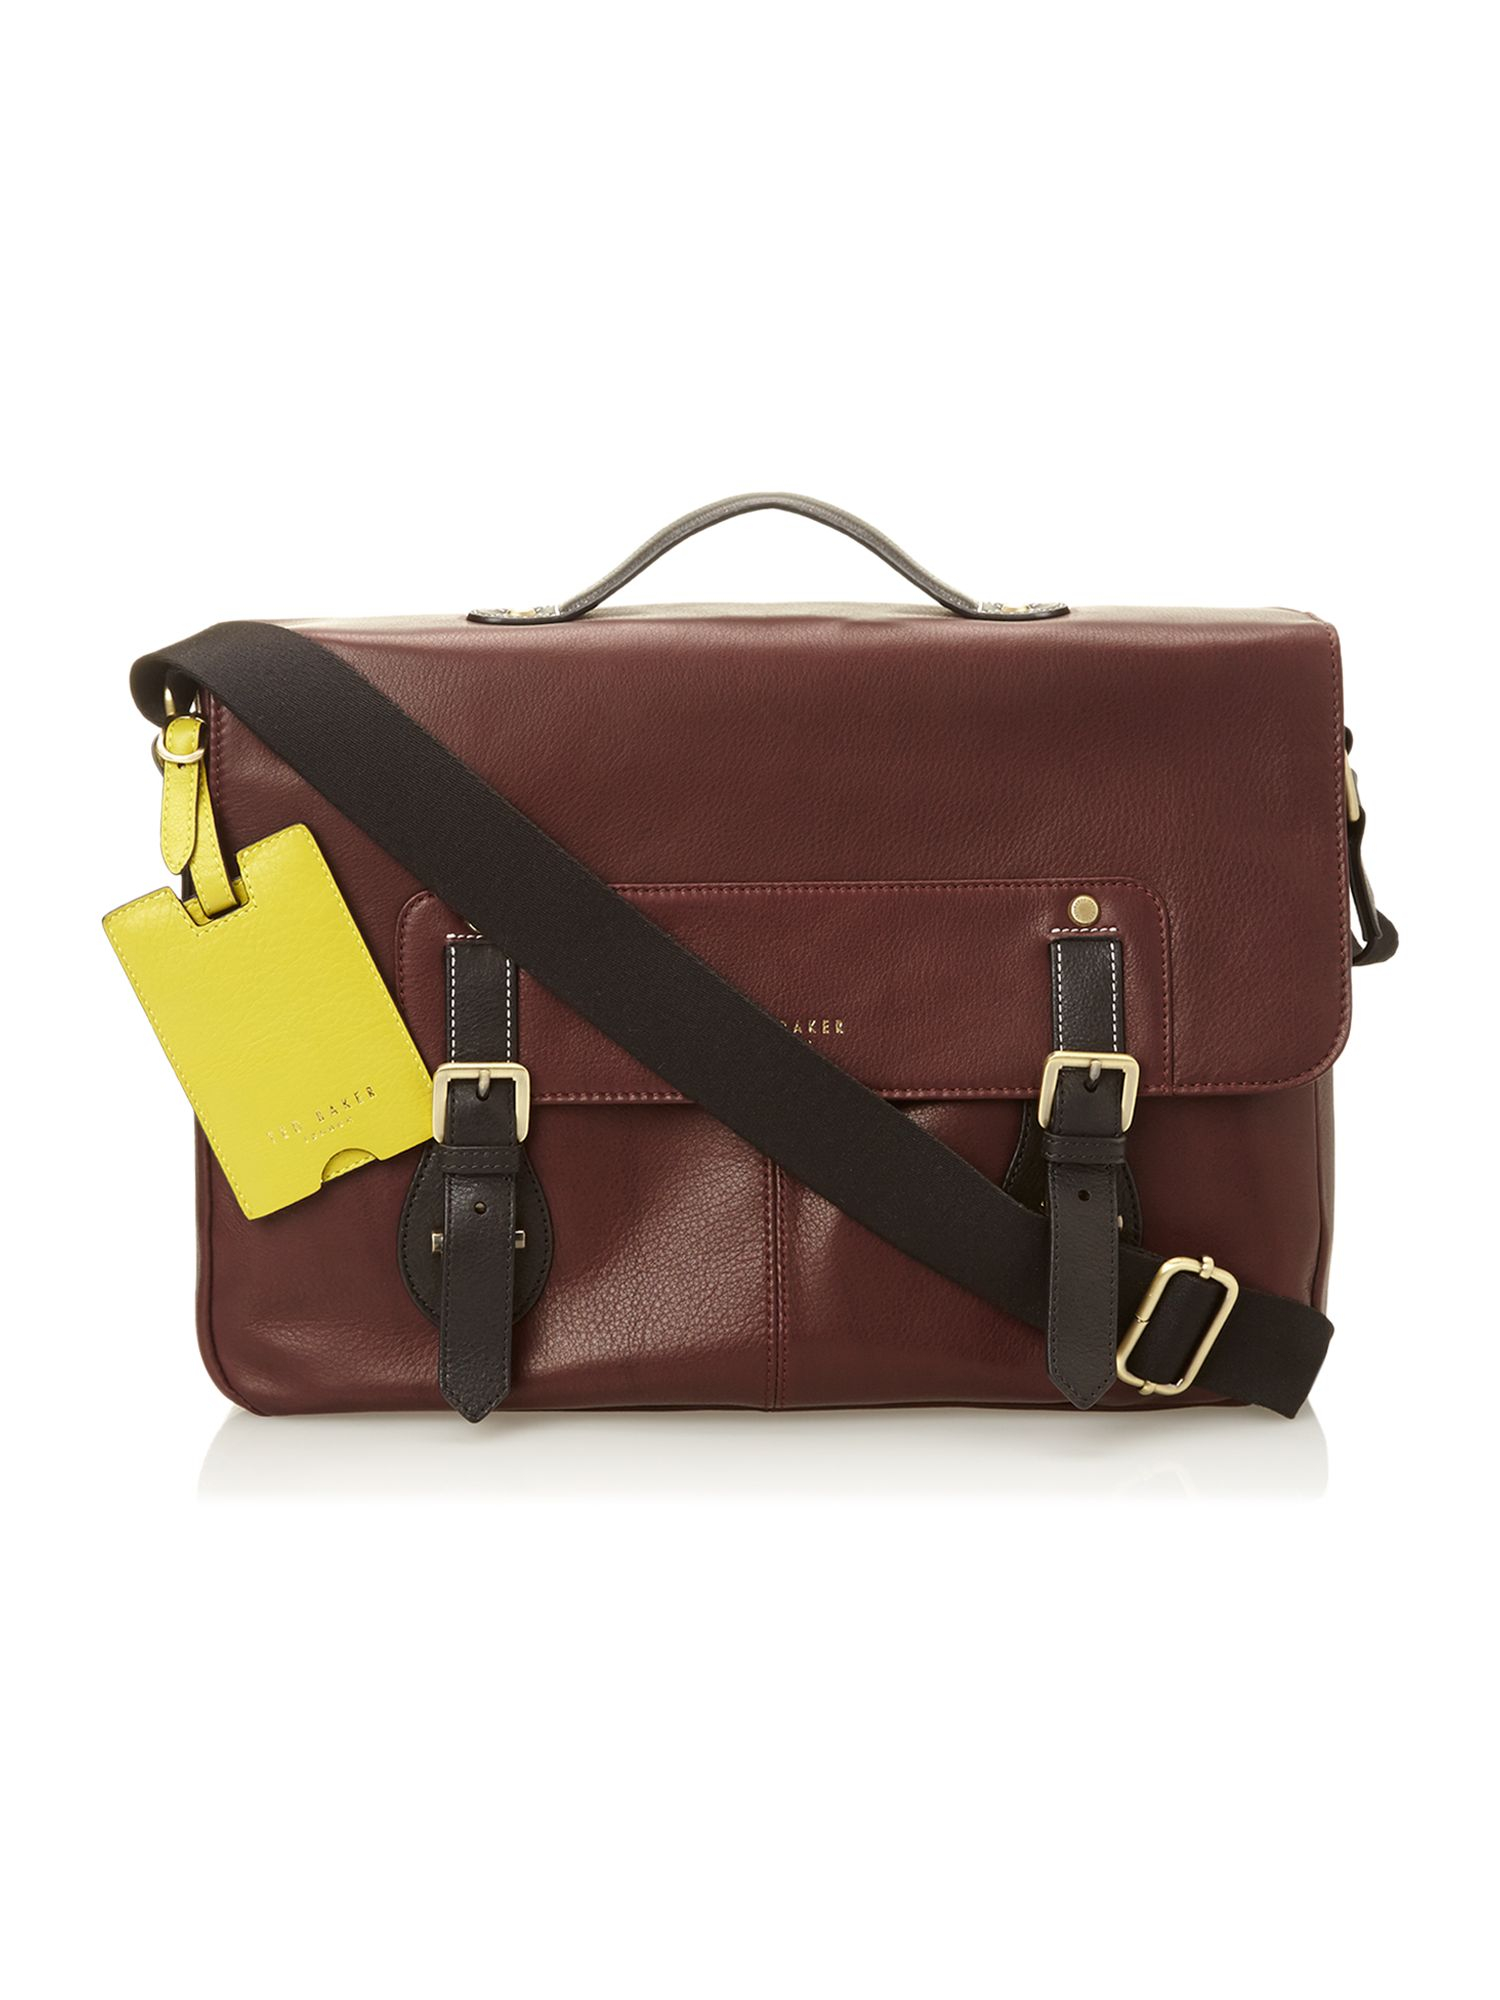 Ted Baker Contrast Leather Messenger Bag in Red for Men (Ox Blood) | Lyst